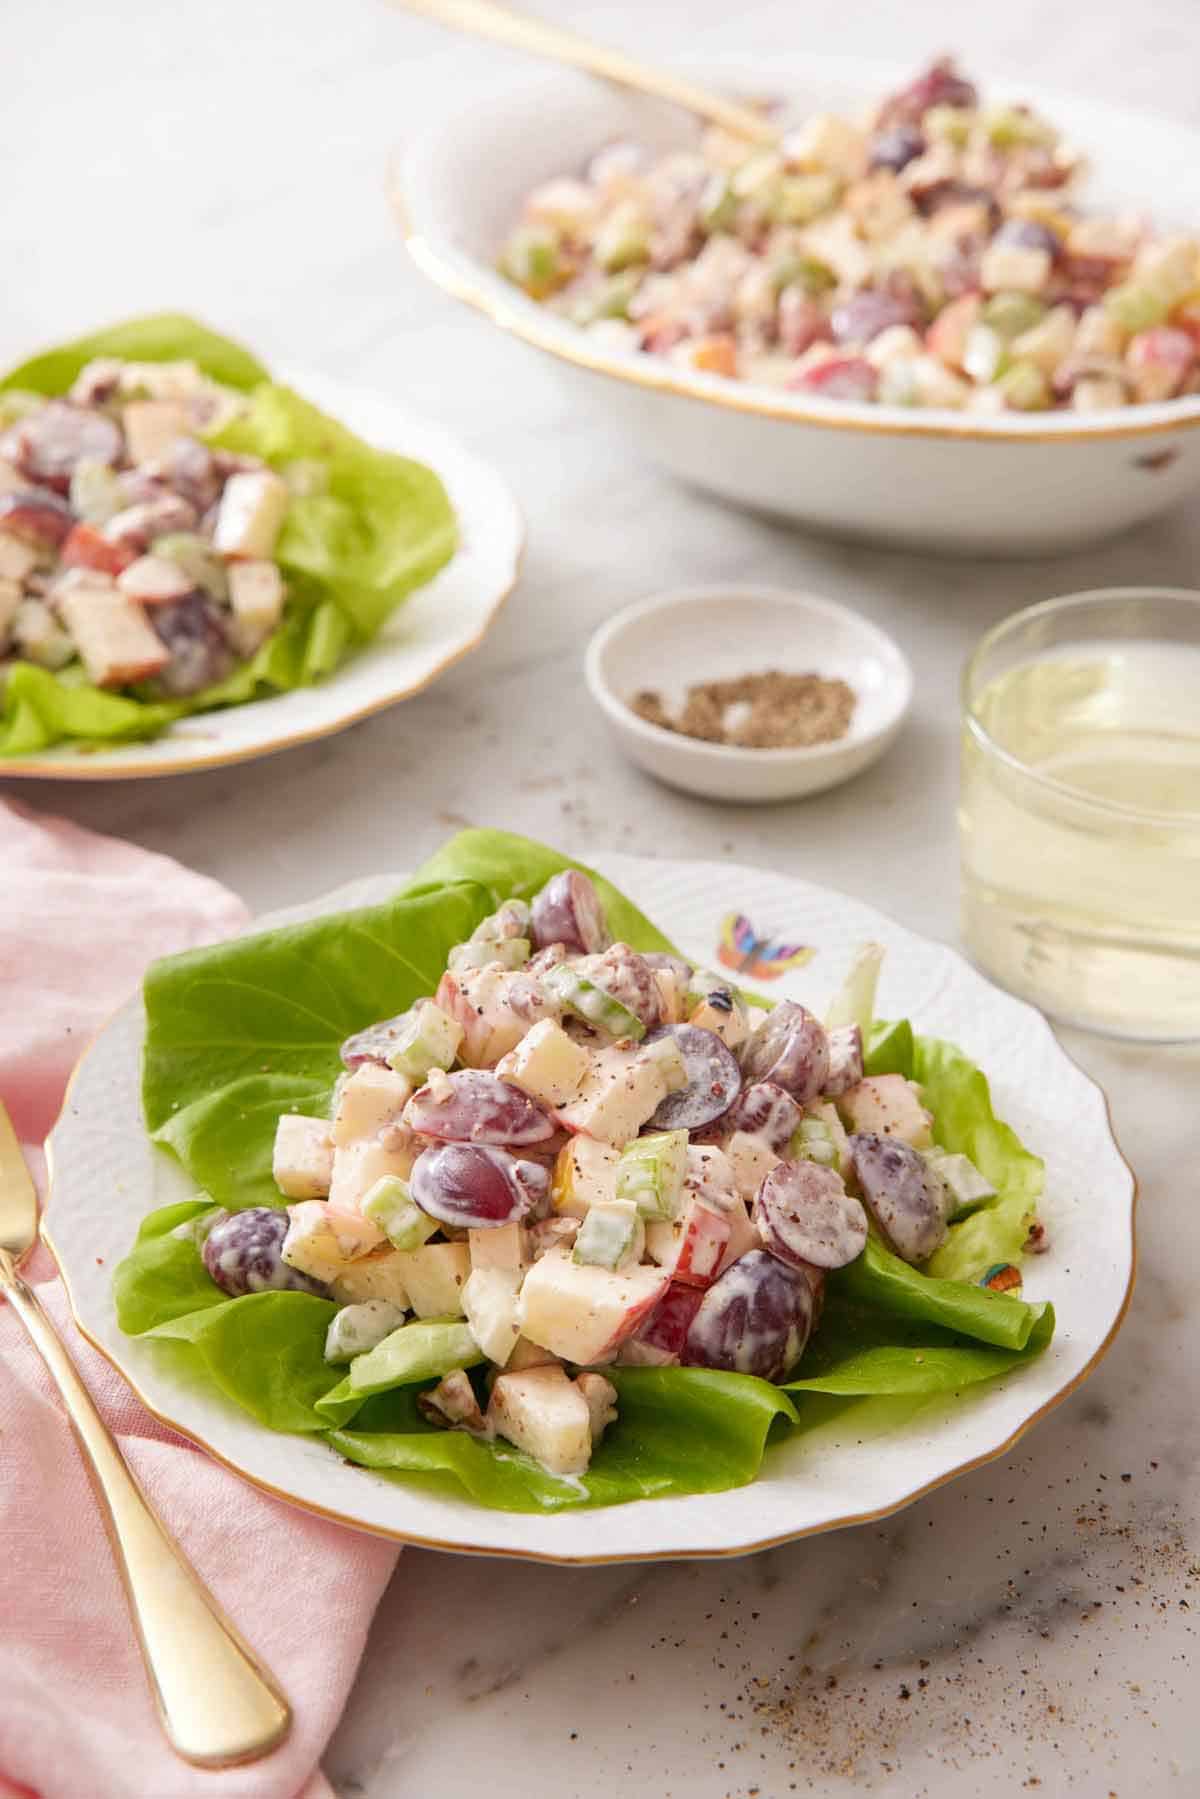 A plate with Waldorf salad on a lettuce leaf with another plated serving and a platter of salad in the background. A glass of wine and some pepper behind the plate.